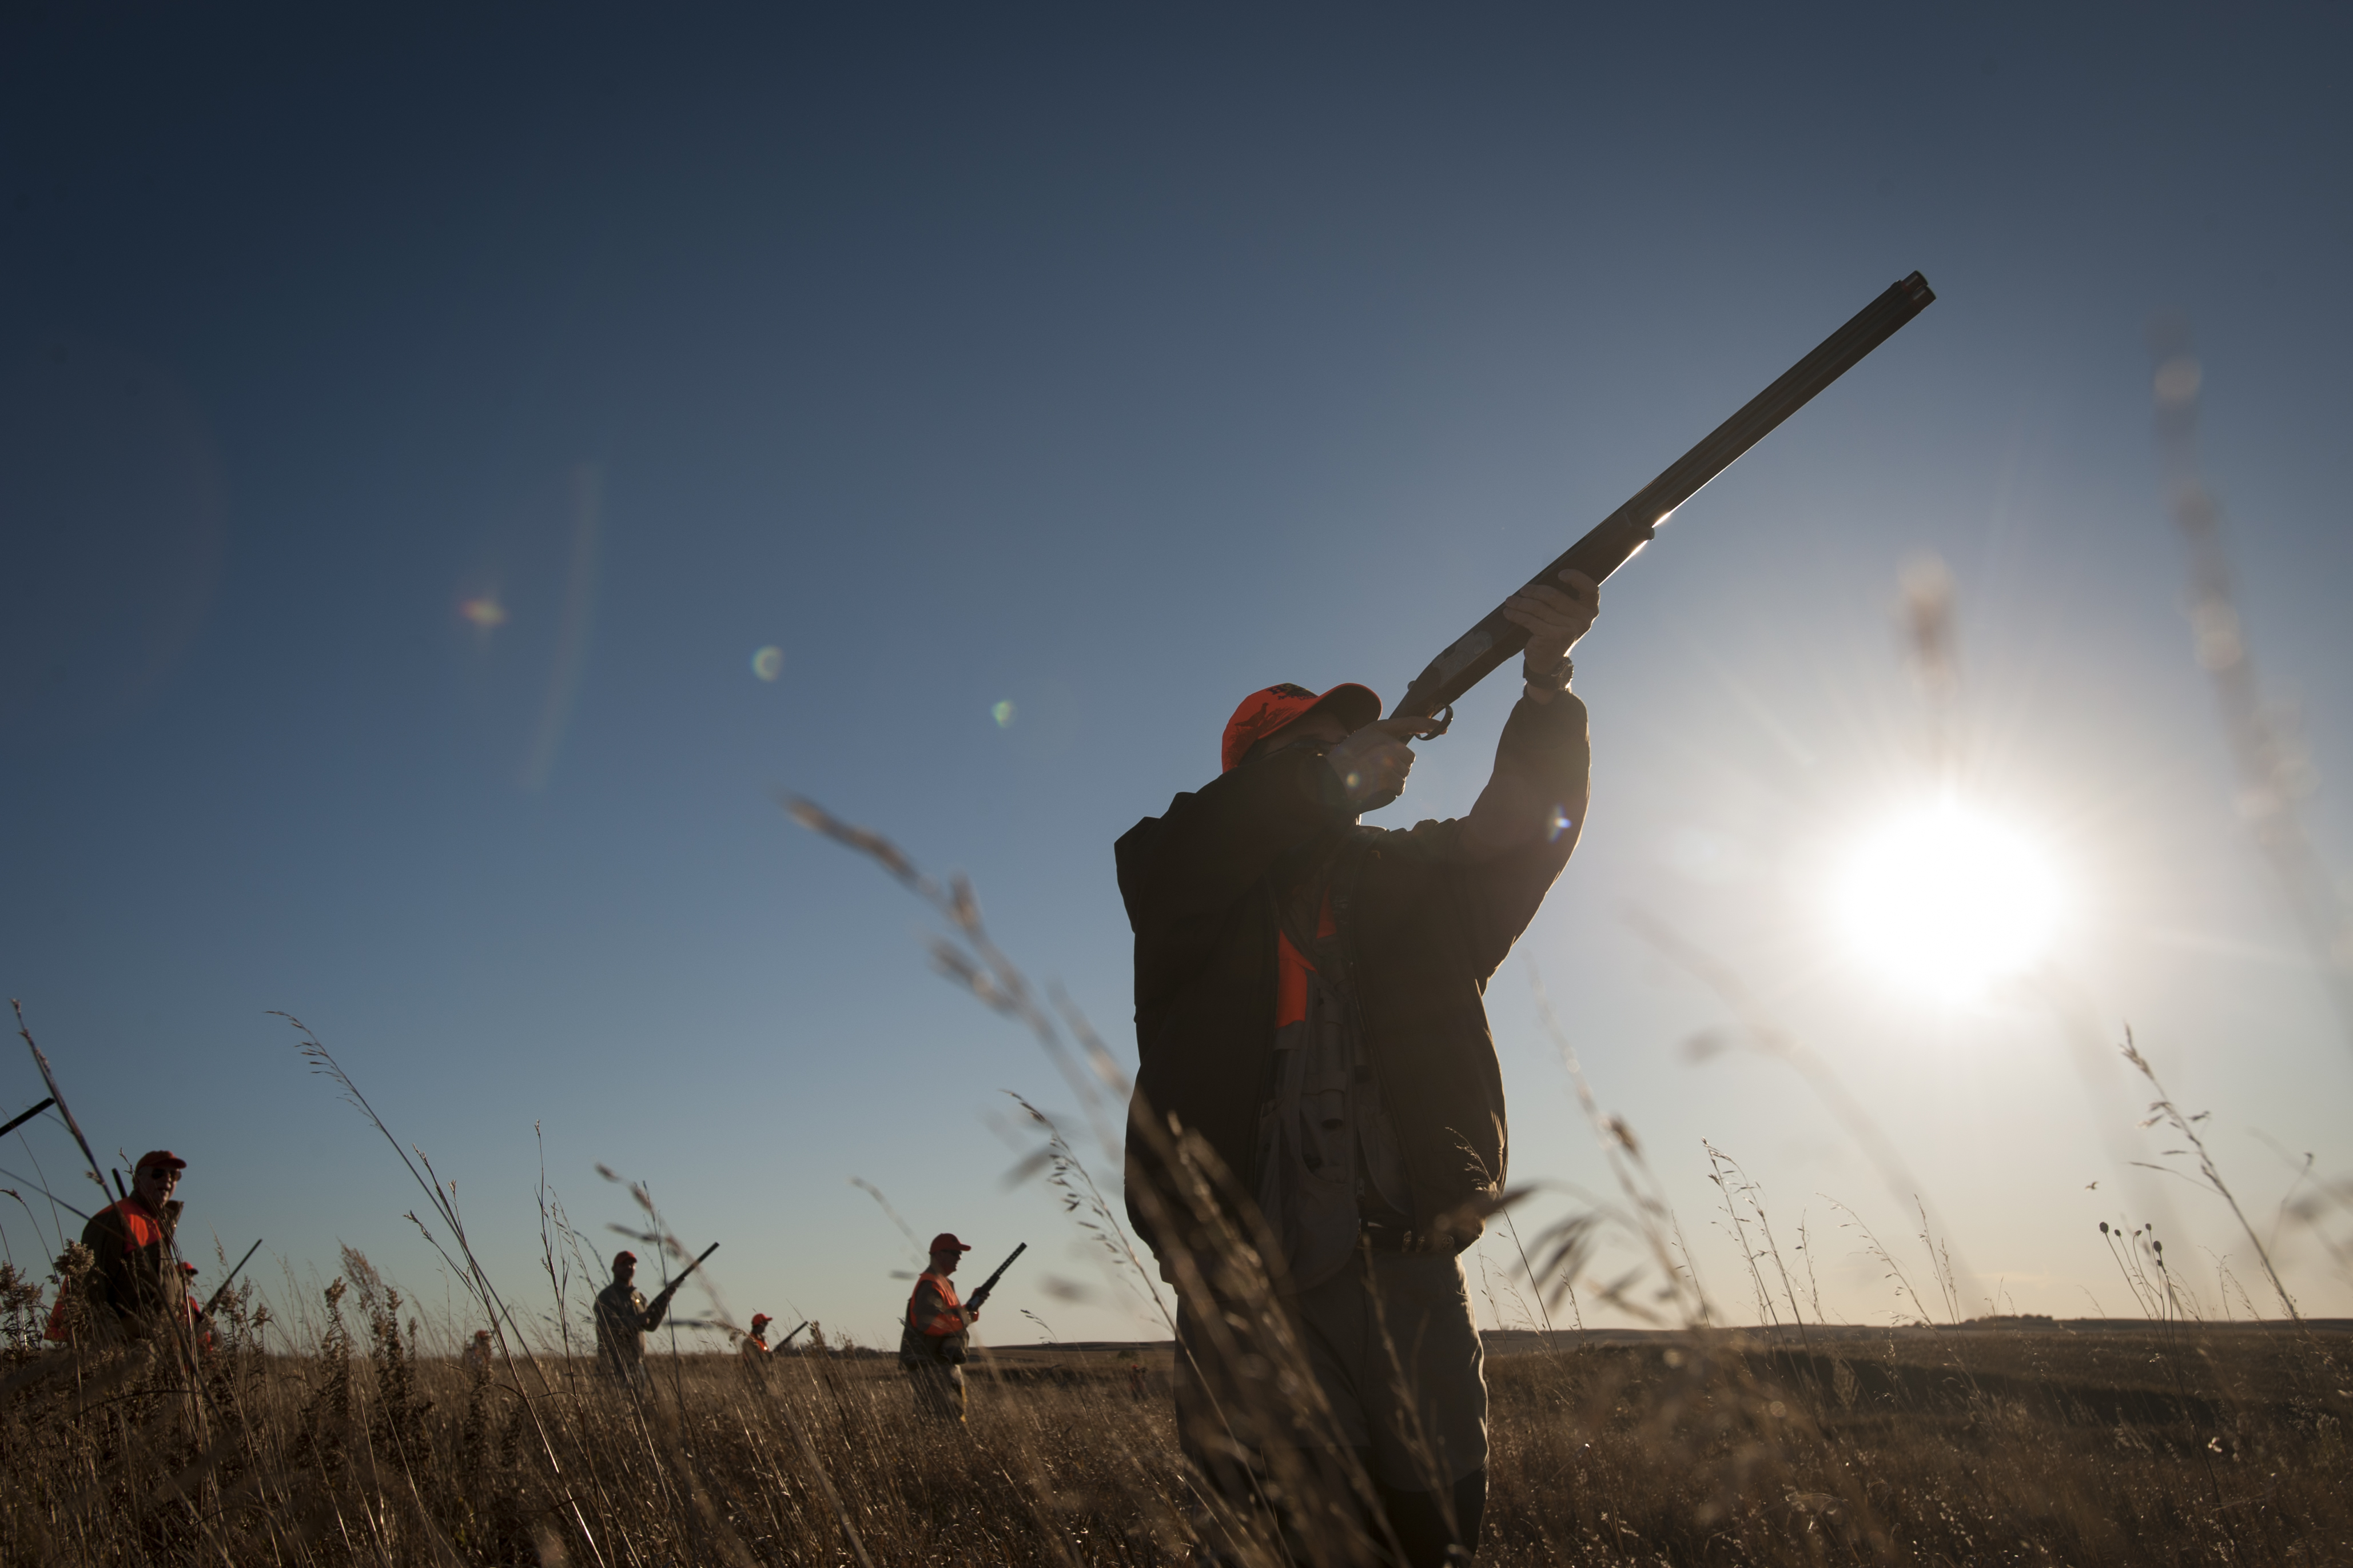 Republican presidential candidate, Texas Sen. Ted Cruz fires his shotgun at a pheasant during the Col. Bud Day Pheasant Hunt hosted by Congressman Steve King outside of Akron, Iowa on Oct. 31, 2015.